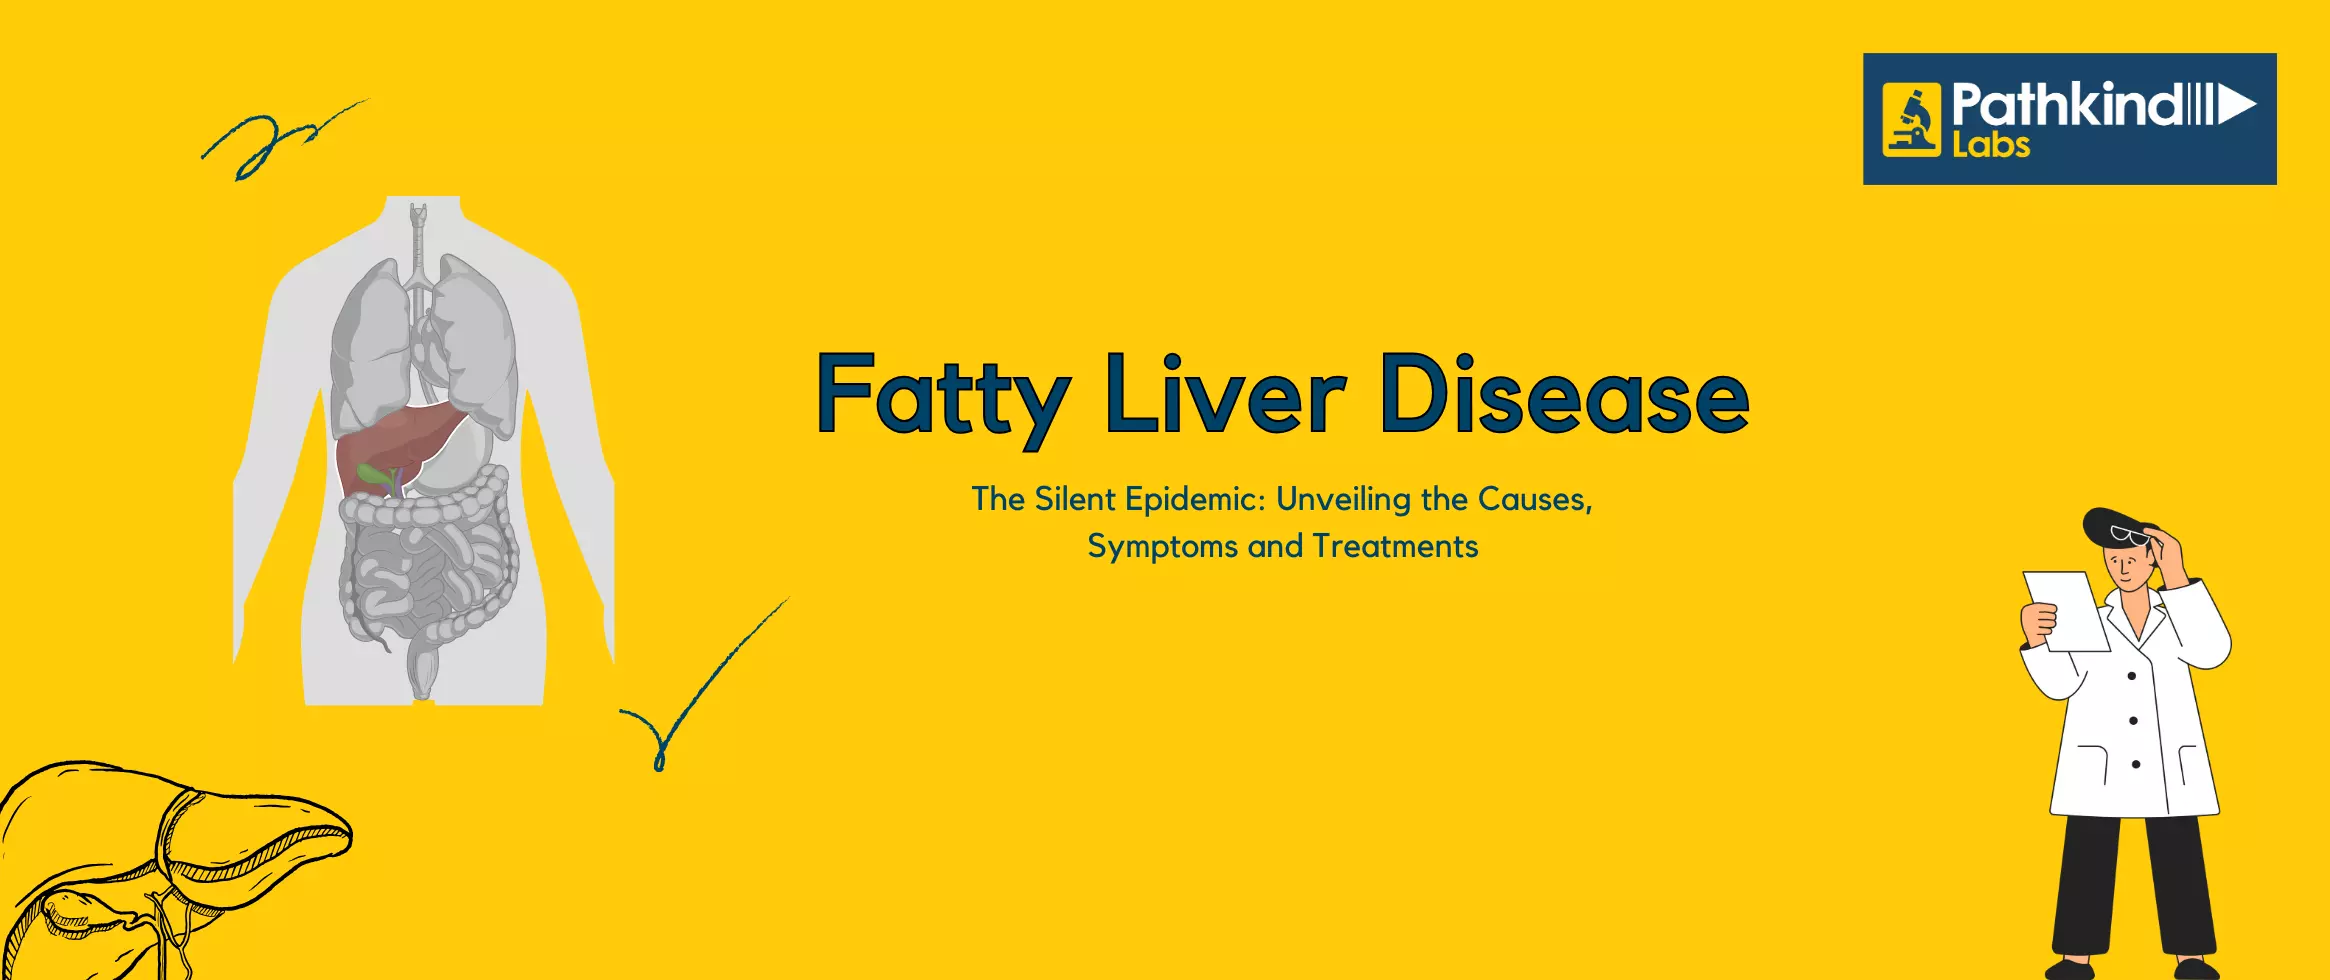 Causes, Symptoms and Treatments of Fatty Liver Disease